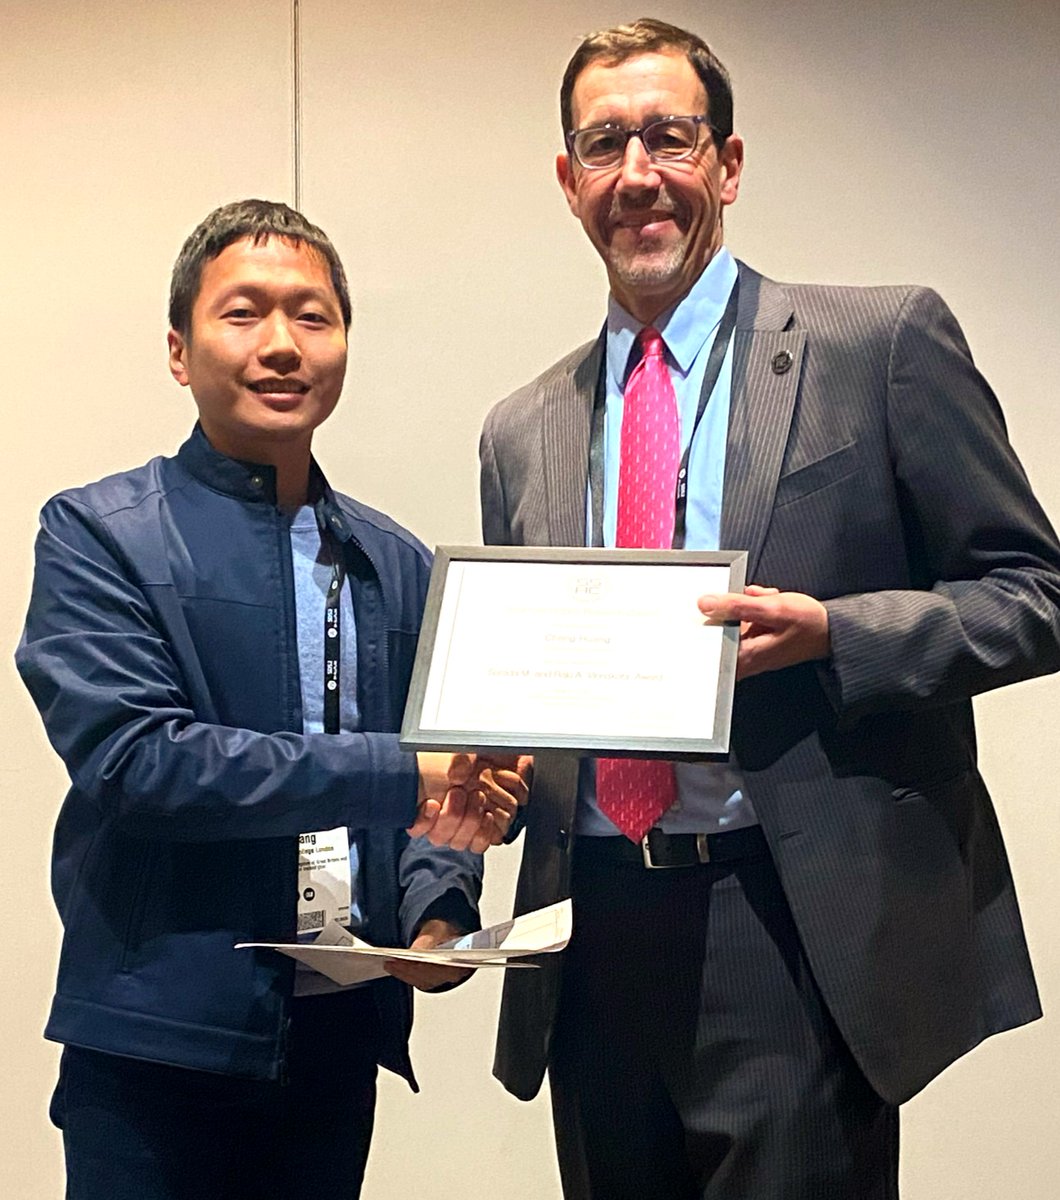 Congratulations to Cheng, with co-authors Xin and @LeroyGardner10, who won the 2023 SSRC Vinnakota Award 🥳 - Access the extended journal version of the paper here: doi.org/10.1016/j.engs… @postbuckling @ImperialCiveng #steelstructures #WAAM #additivemanufacturing